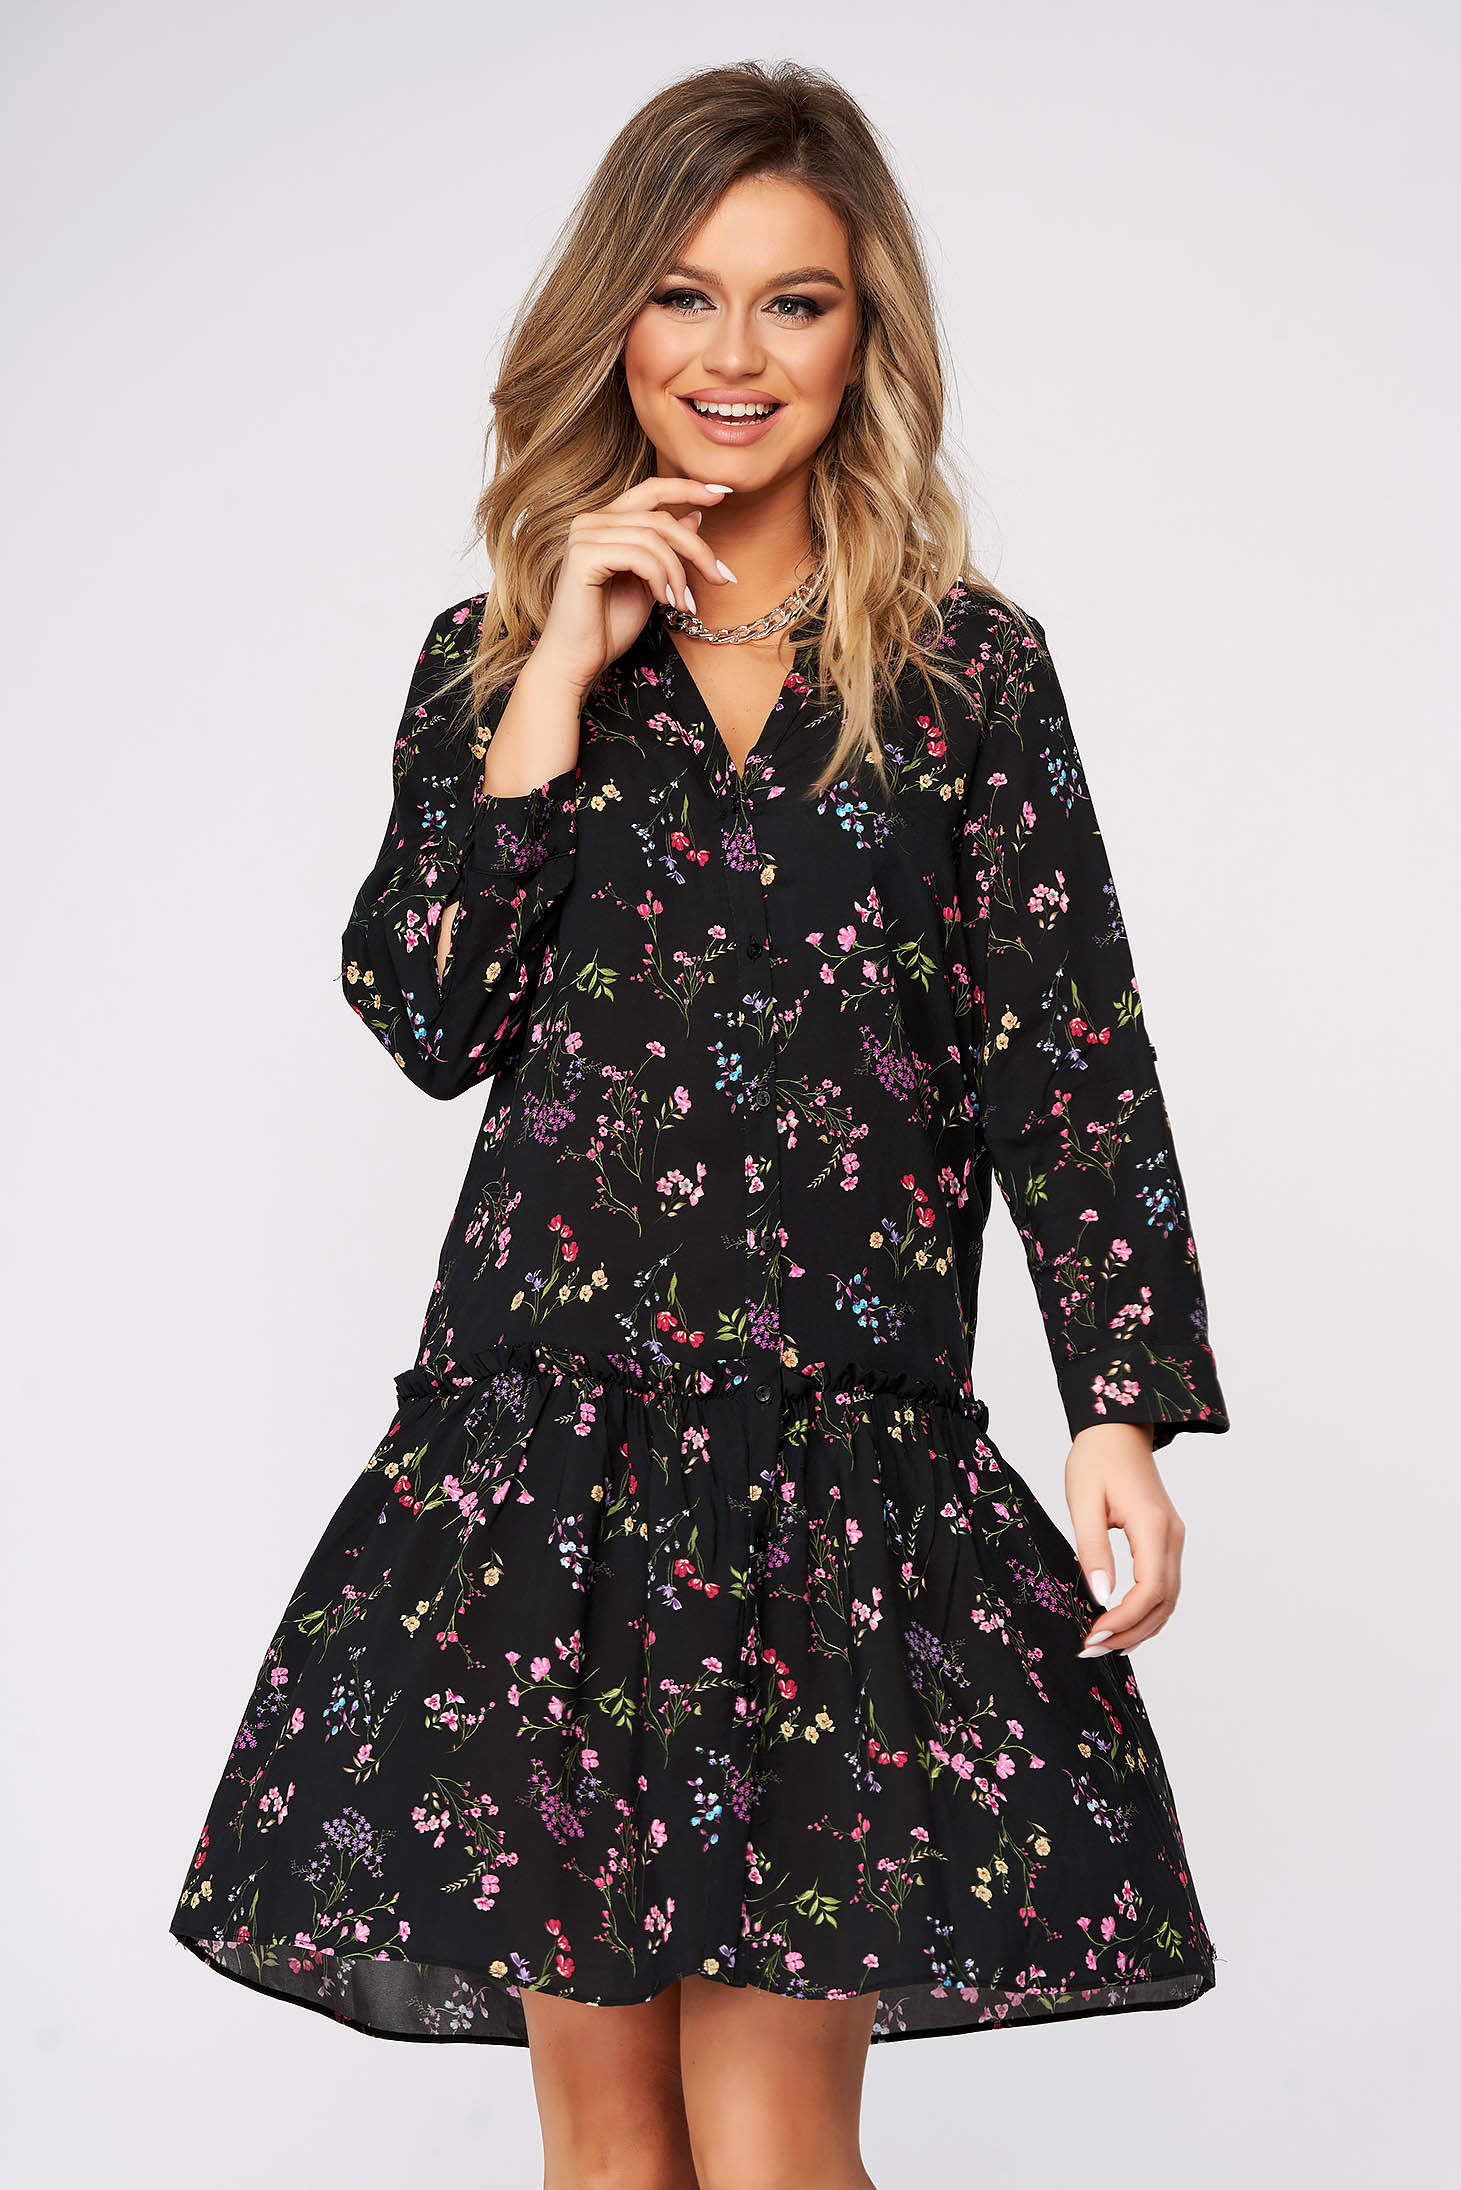 Black dress flared with v-neckline thin fabric with floral print